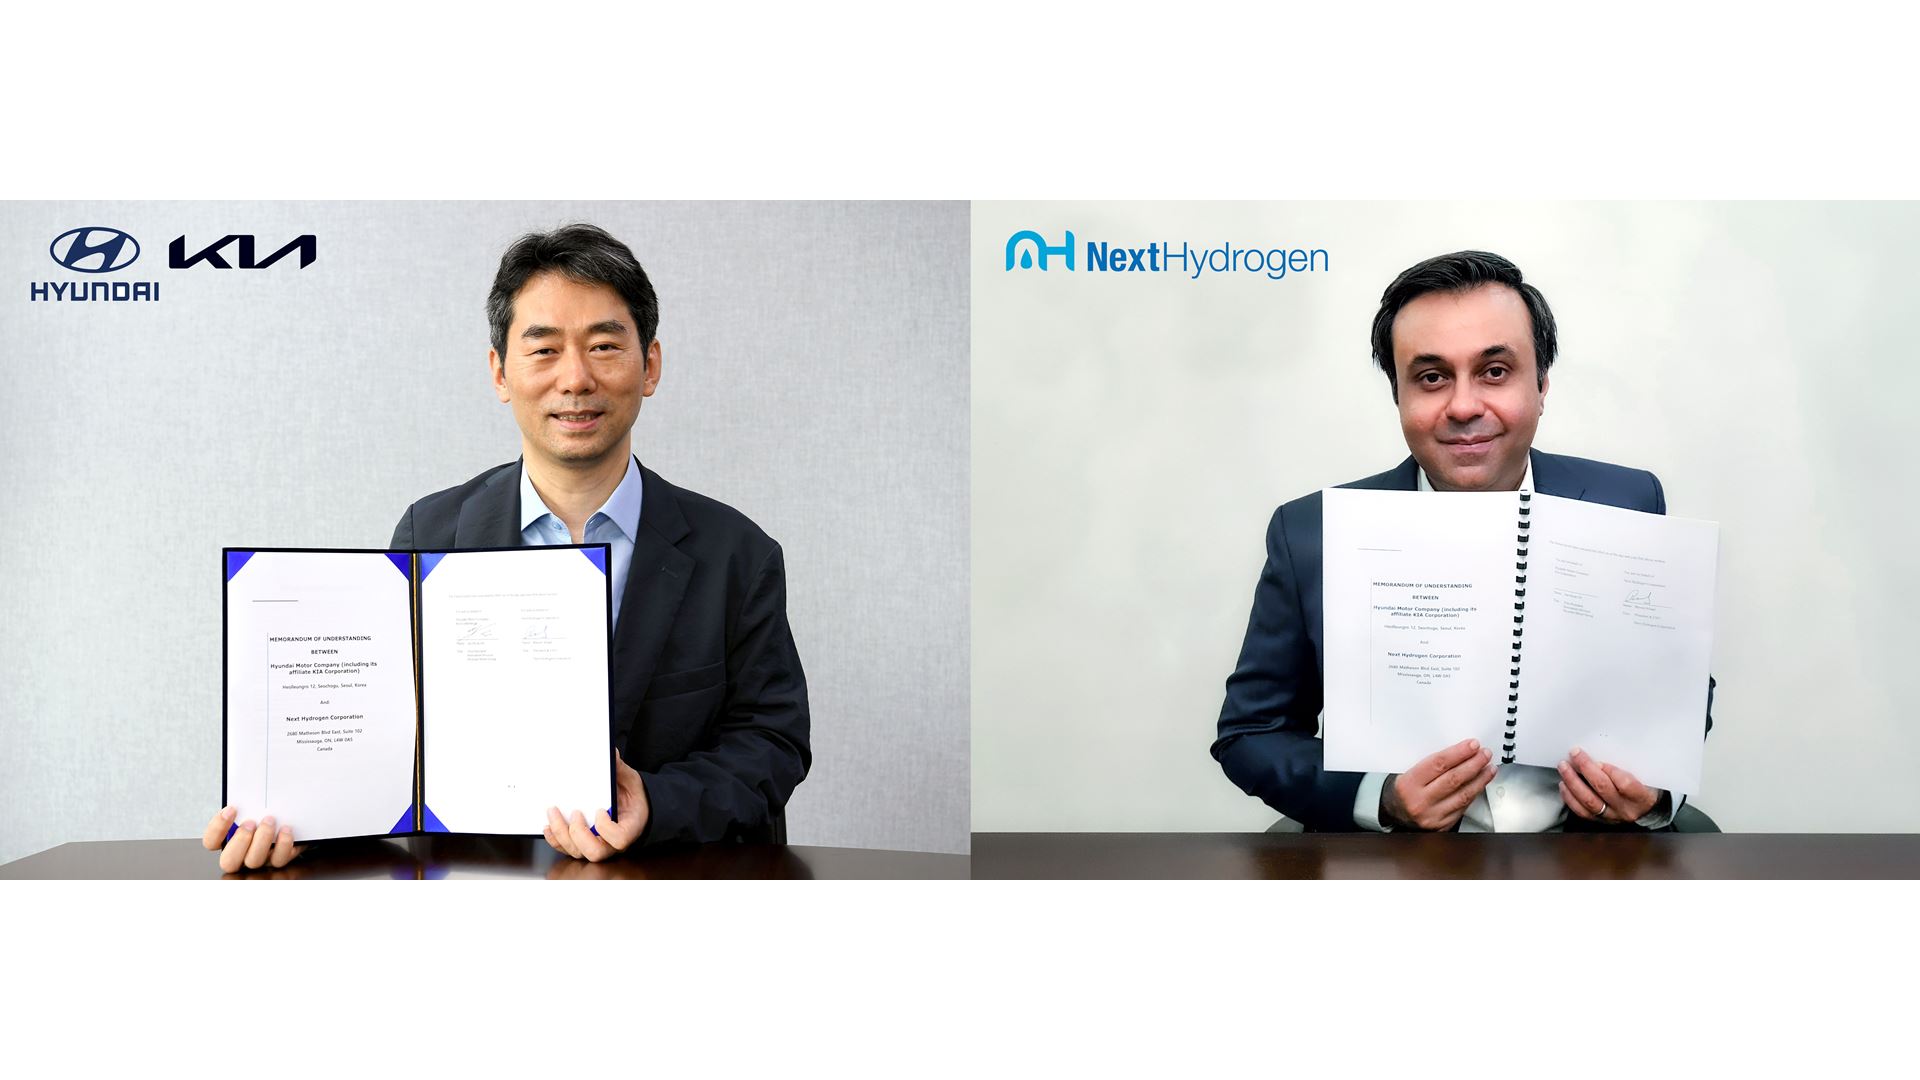 (from left) Jae-Hyuk Oh, Vice President and Head of Energy Business Development Group at Hyundai Motor Group / Raveel...